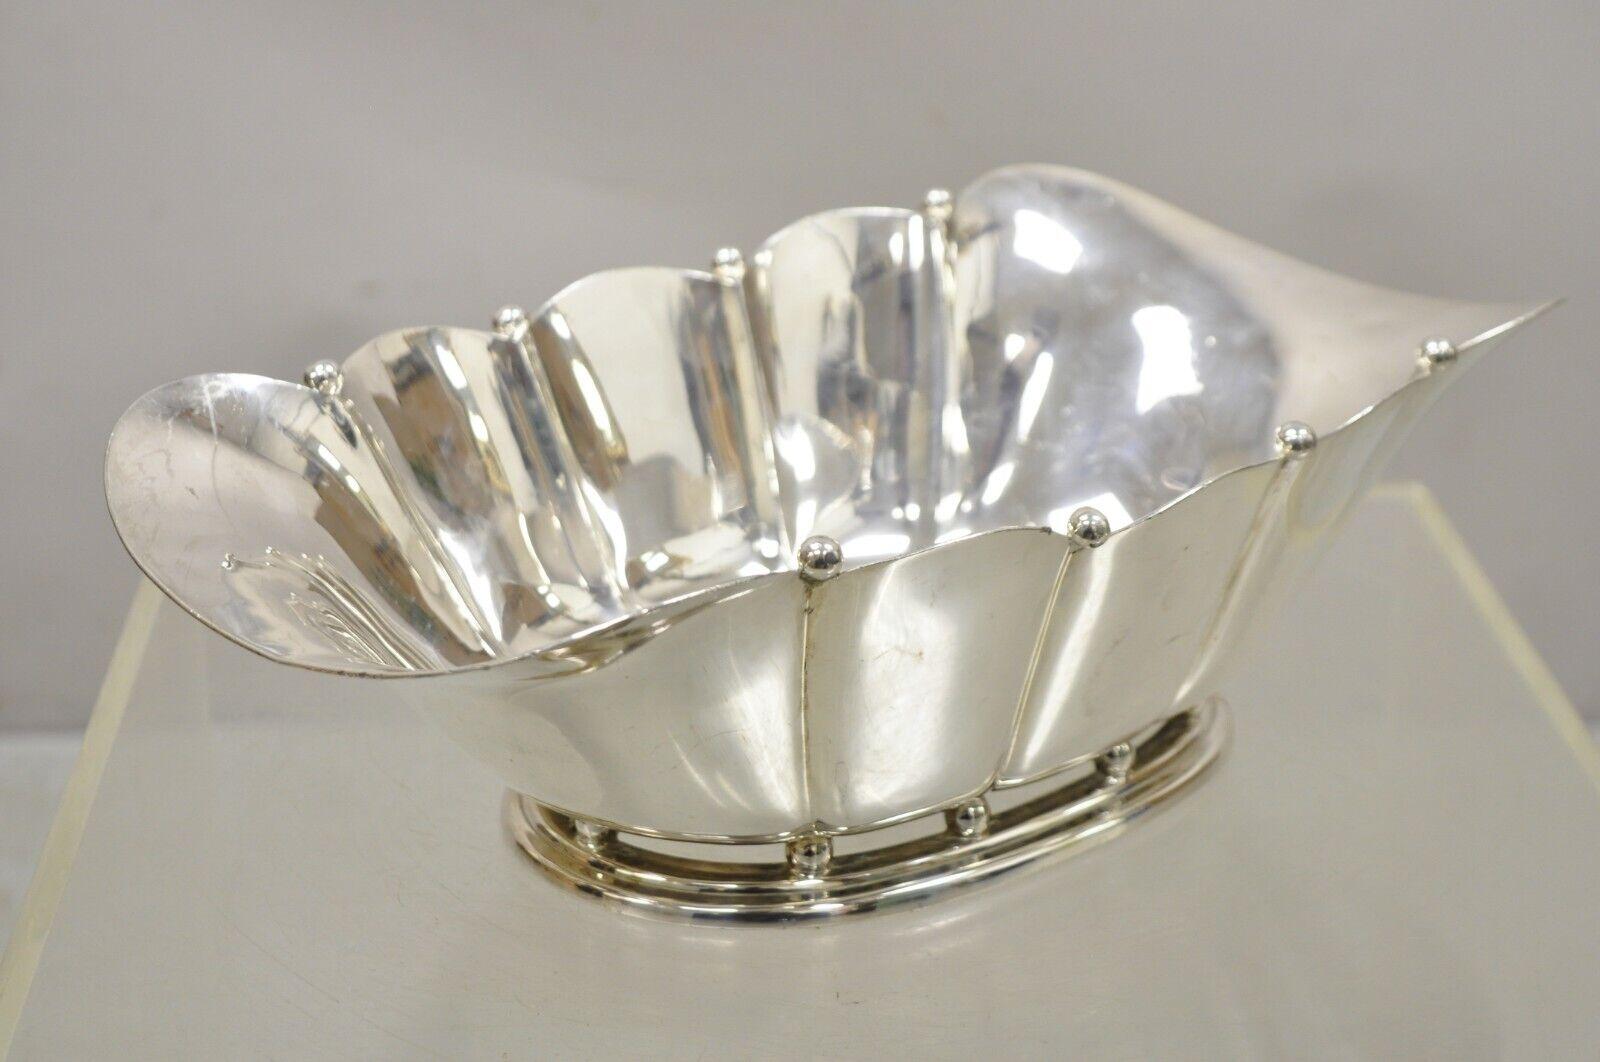 Vintage reed & barton silver plated scalloped fluted large fruit bowl dish. Item features a shapely fluted form, ball form accents, base raised on ball form feet, marked 